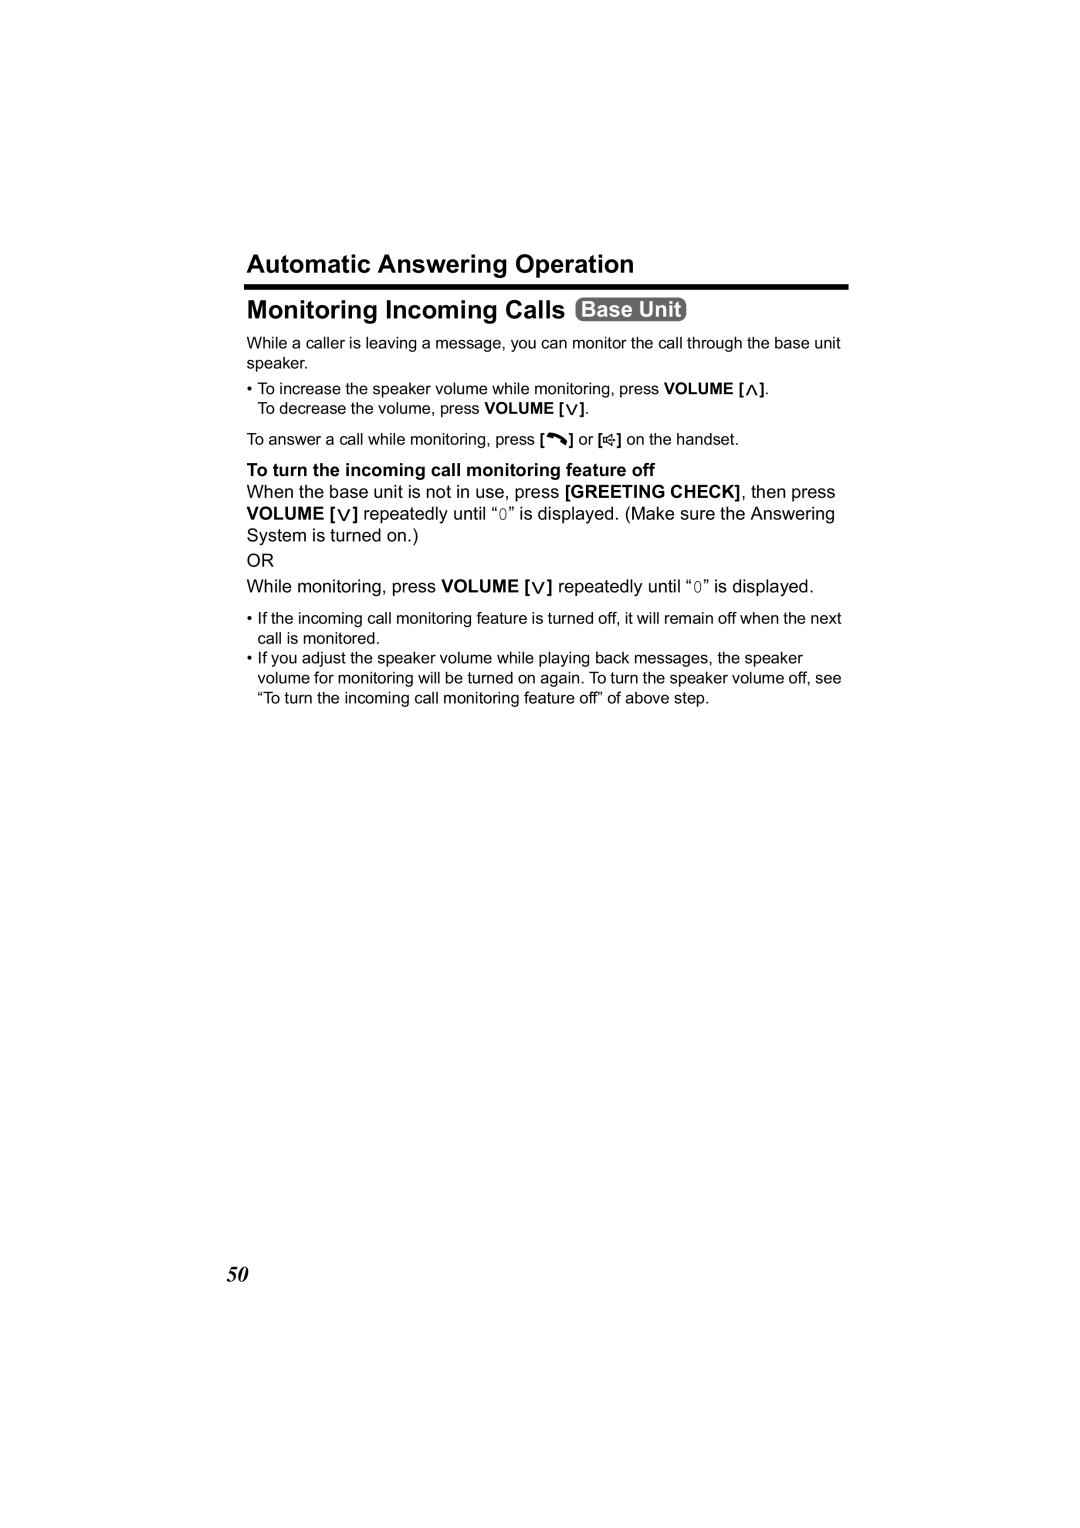 Panasonic KX-TG2344 manual To turn the incoming call monitoring feature off 